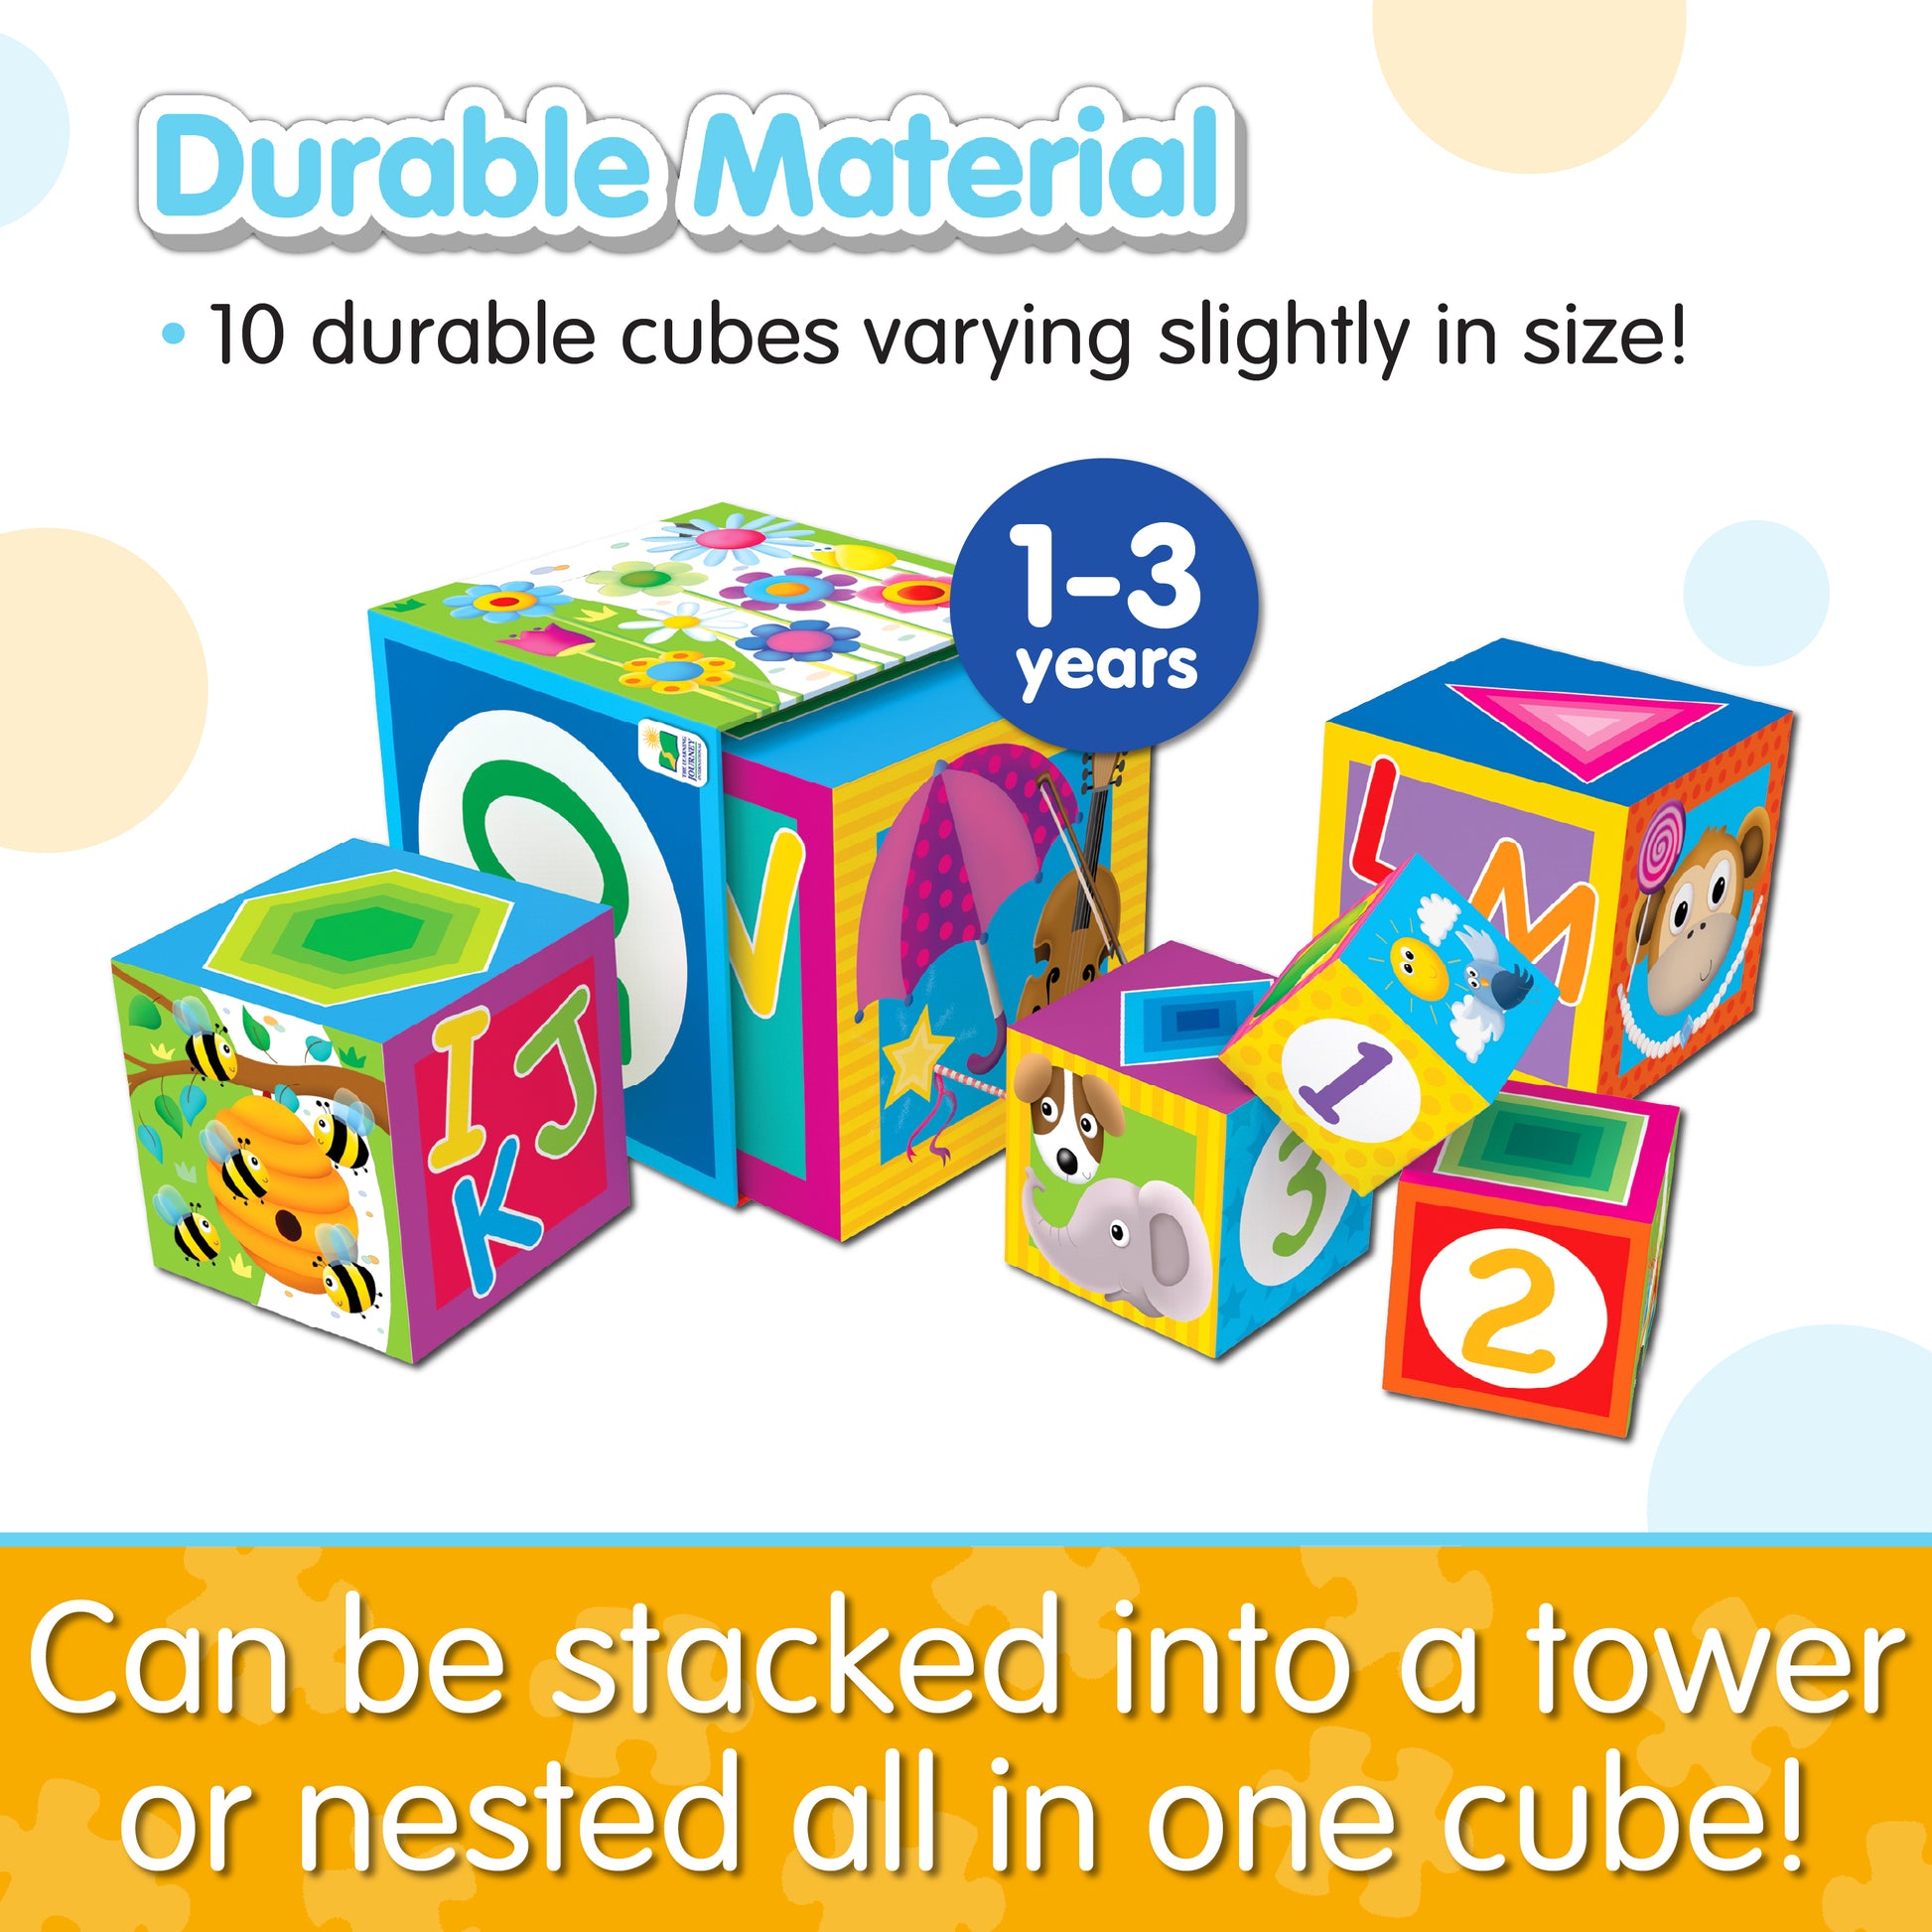 Infographic about Stacking Cubes' durable material that says, "Can be stacked into a tower or nested all in one cube!"